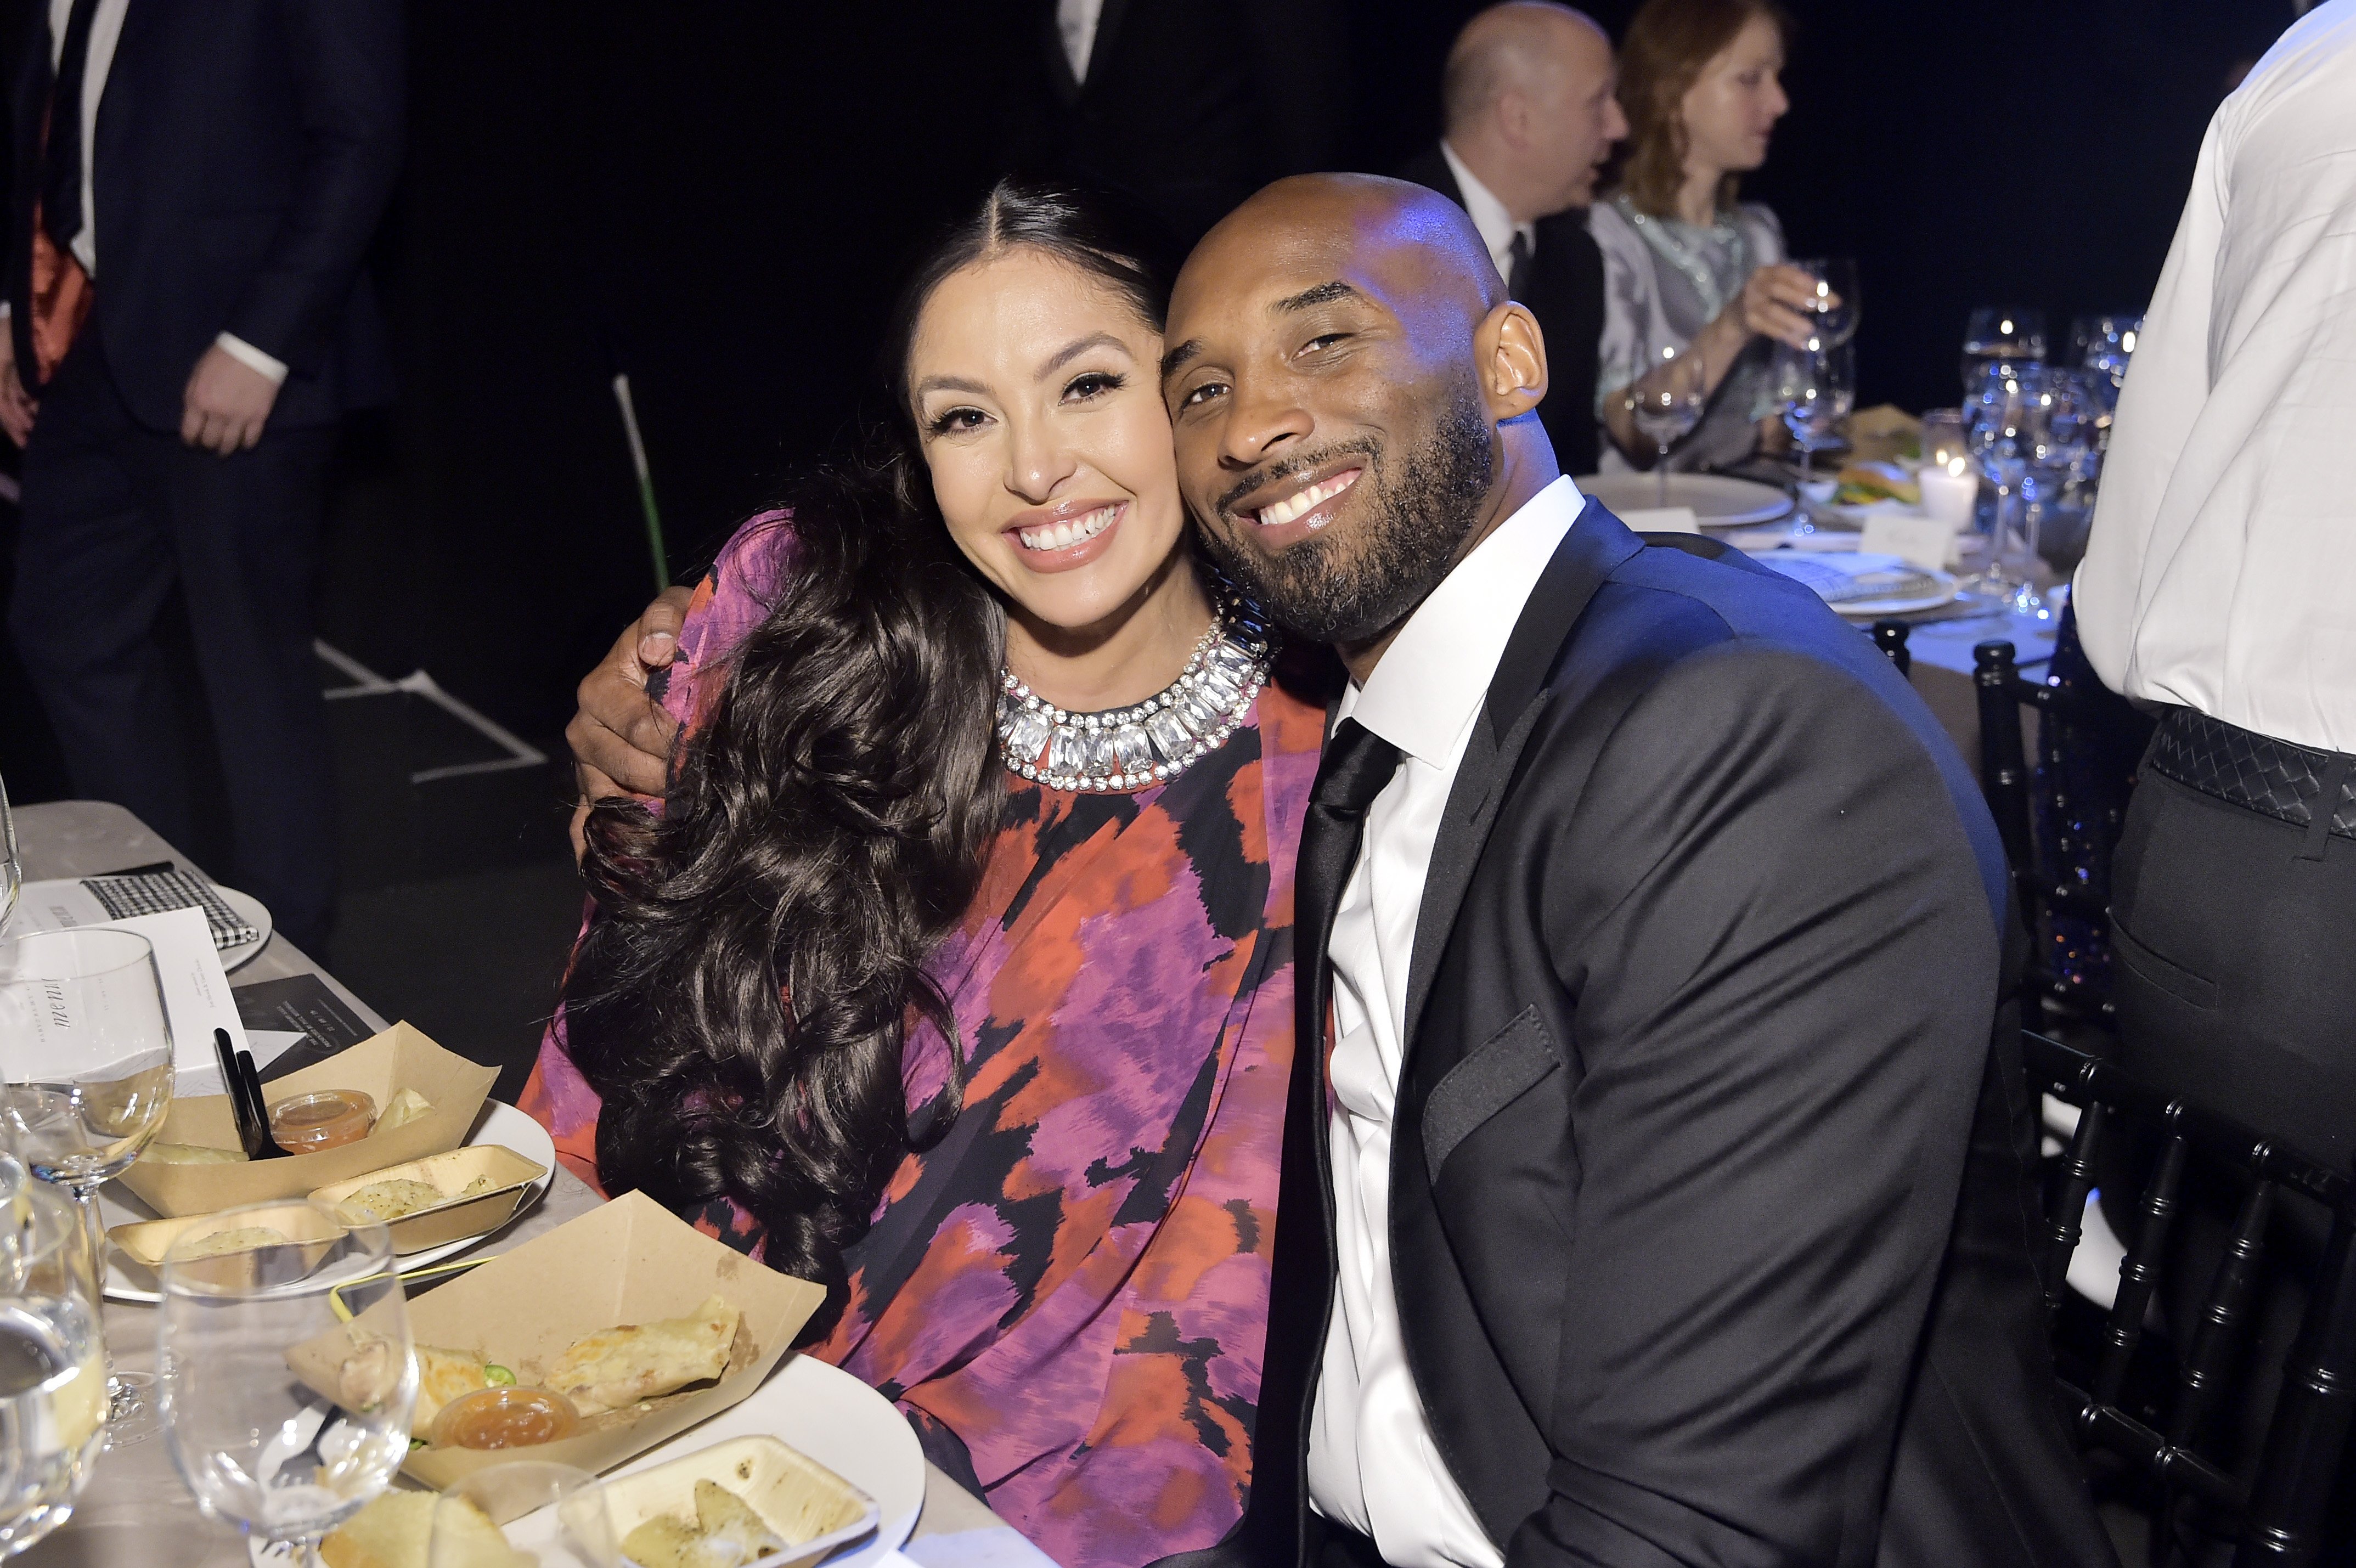 anessa Laine Bryant and Kobe Bryant attend the 2019 Baby2Baby Gala presented by Paul Mitchell on November 09, 2019 | Photo: GettyImages